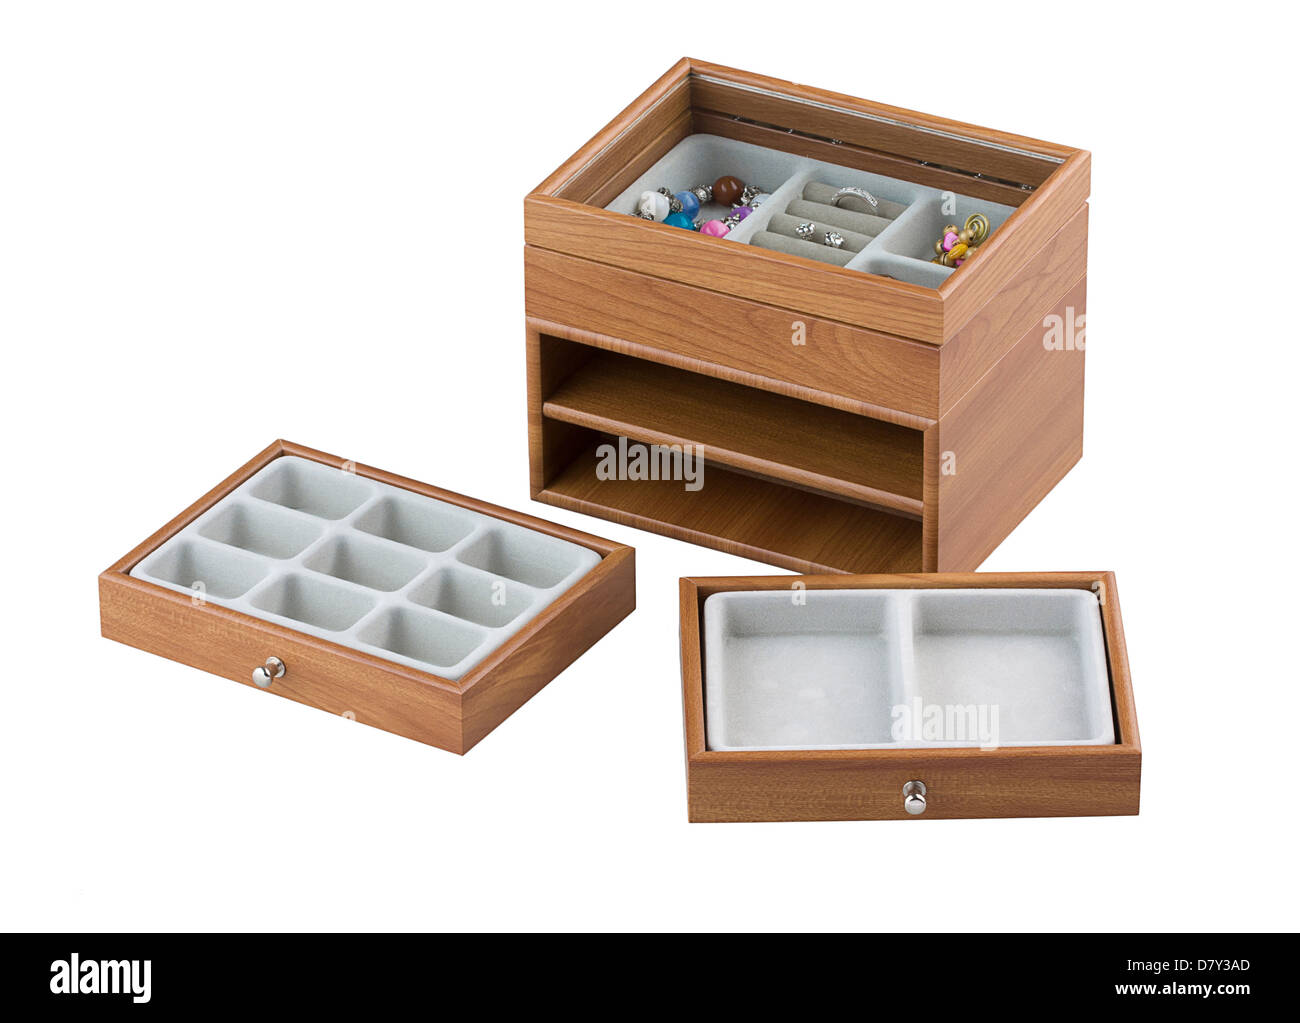 Beautiful wooden jewelry box with drawers Stock Photo